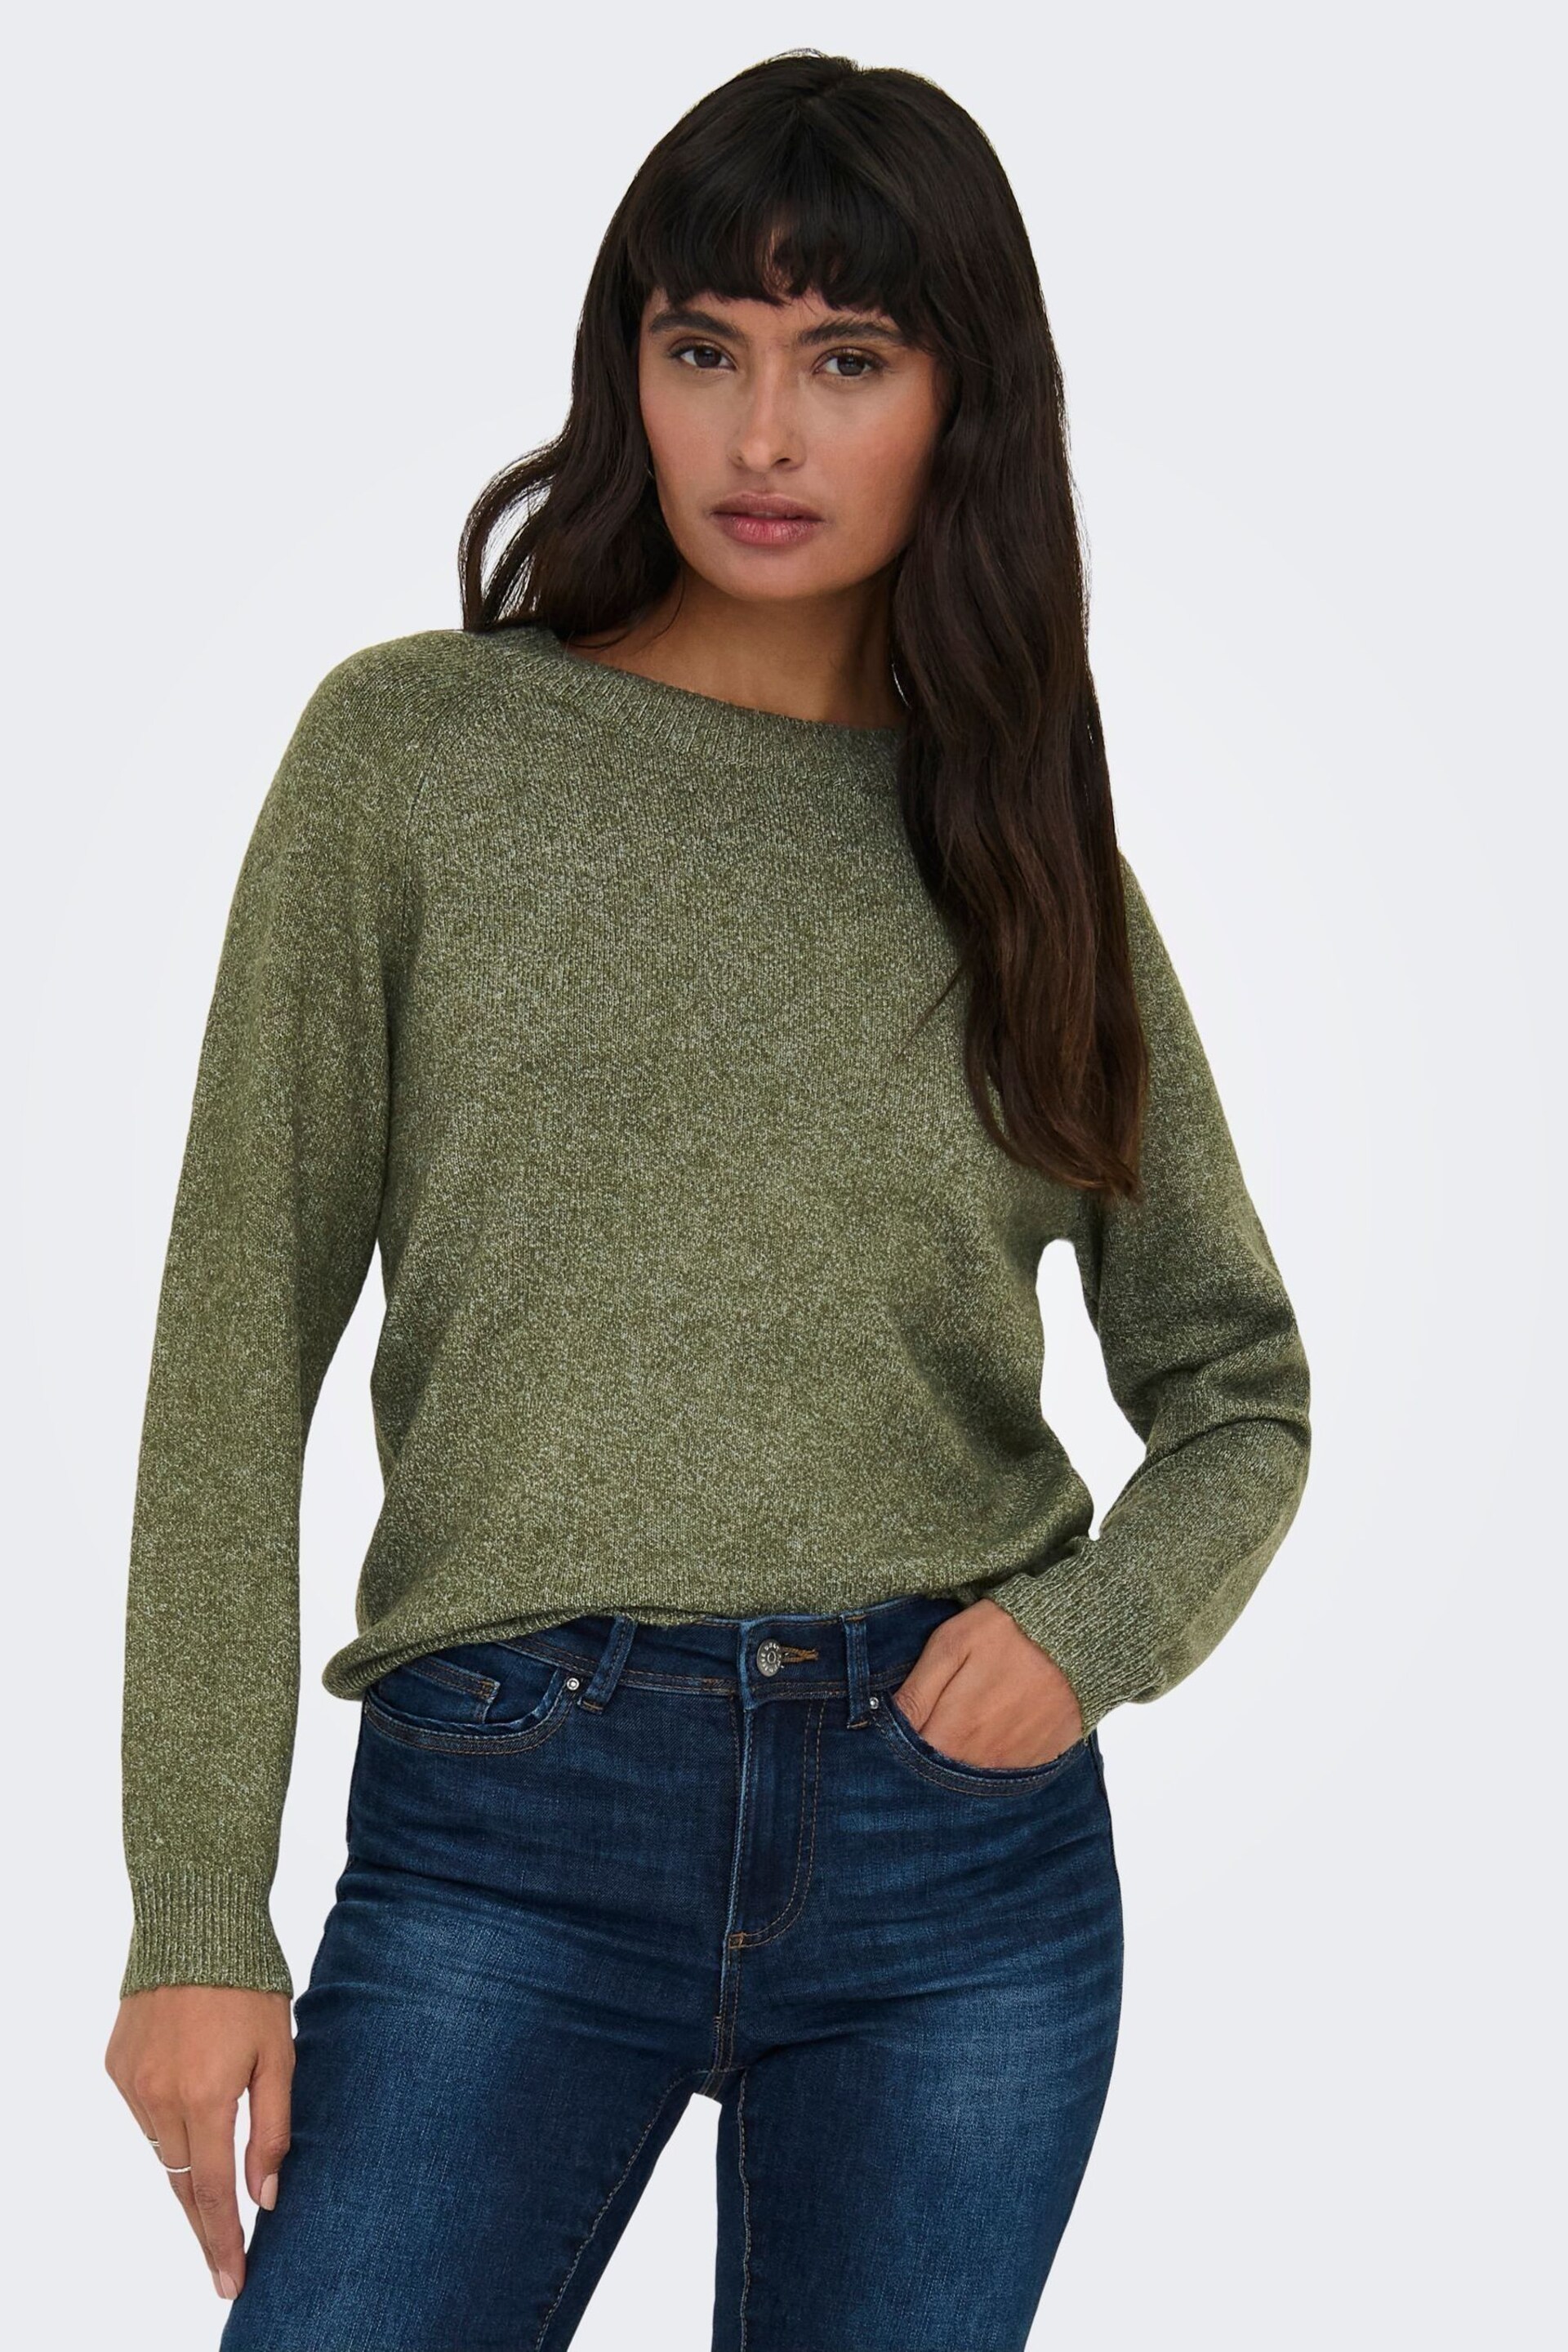 ONLY Green Round Neck Knitted Jumper - Image 3 of 5